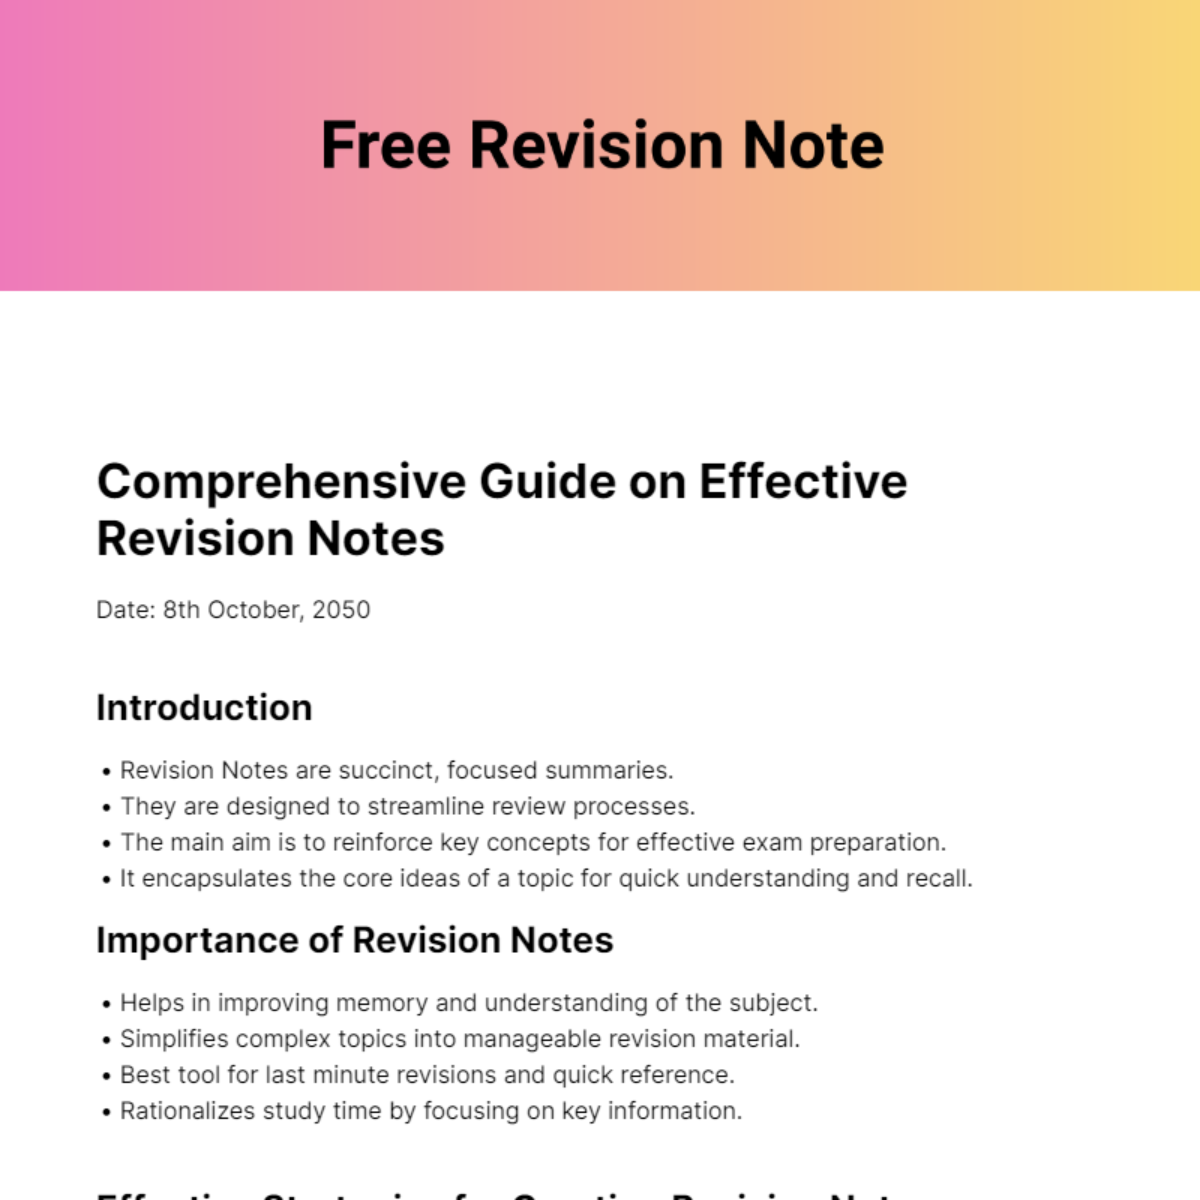 Free Revision Note Template